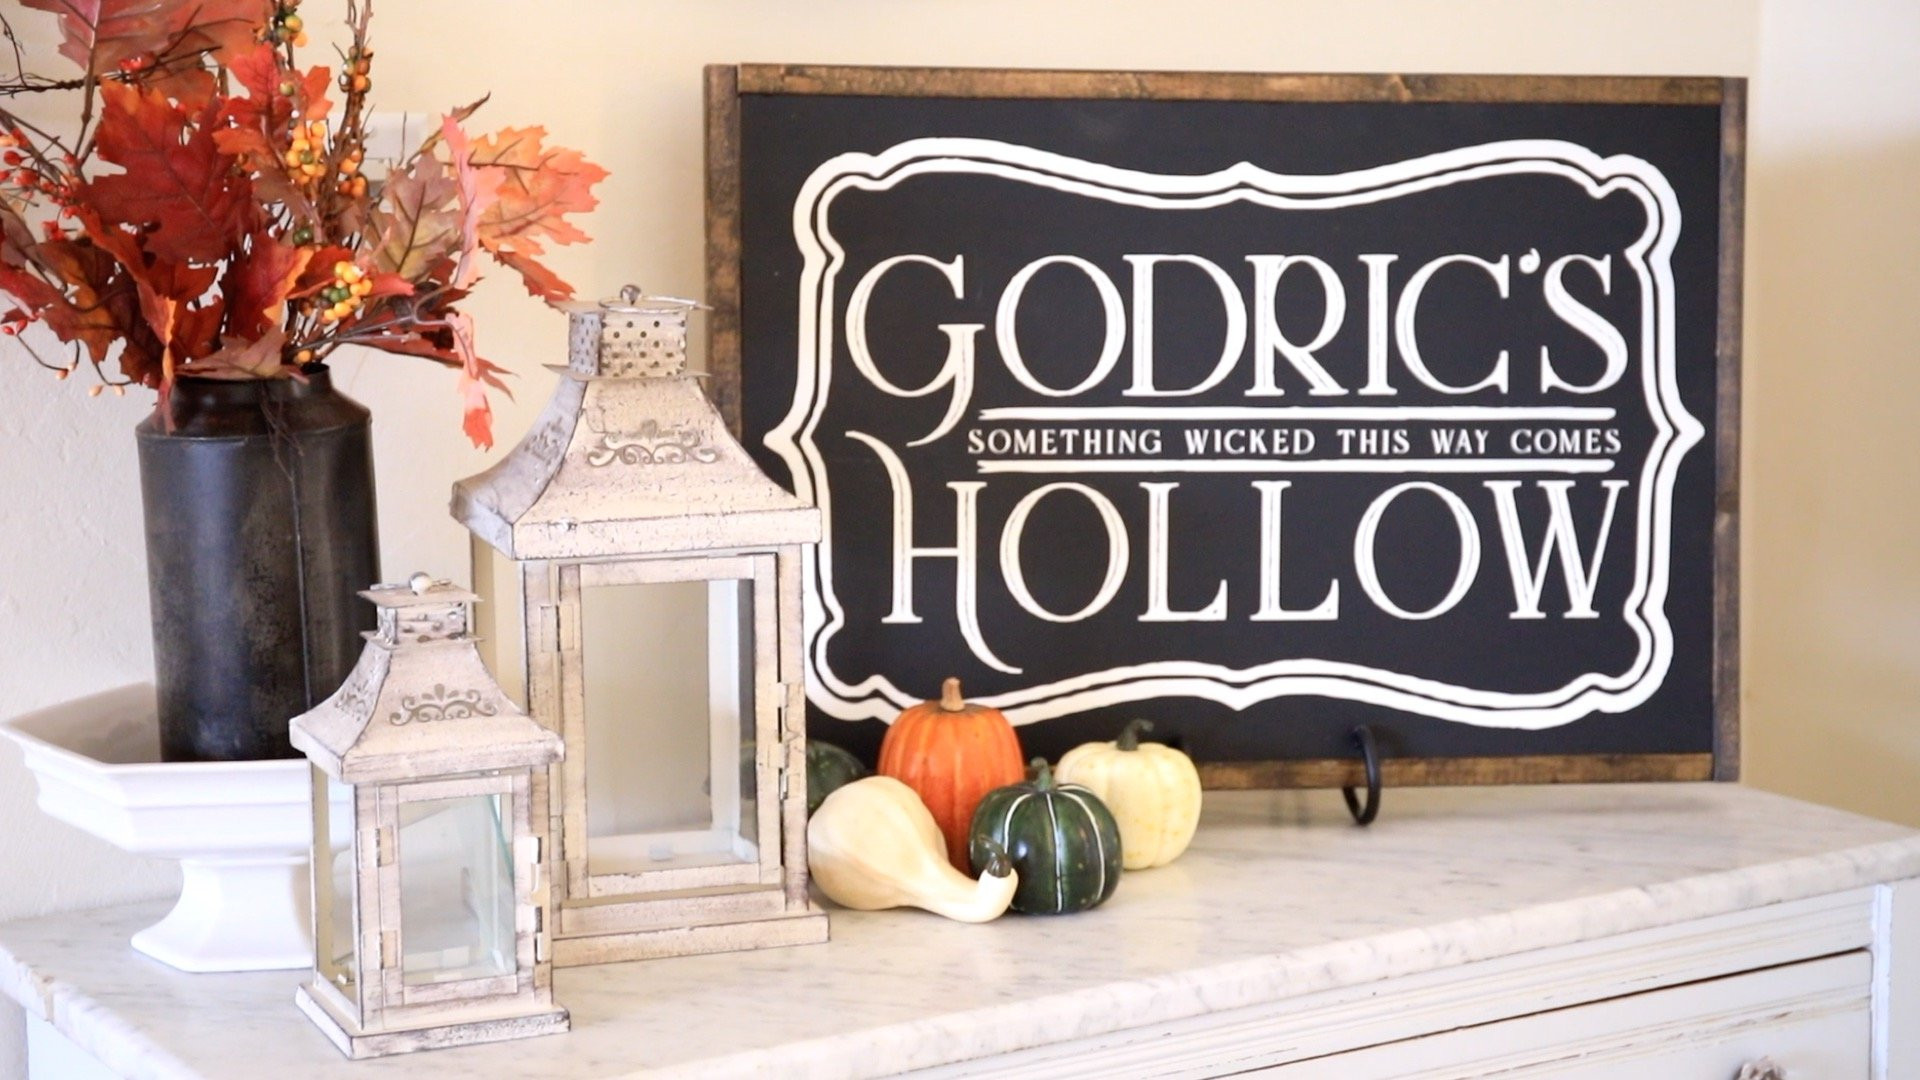 Harry Potter Decorations DIY
 Halloween Decor DIY Harry Potter Inspired Sign The